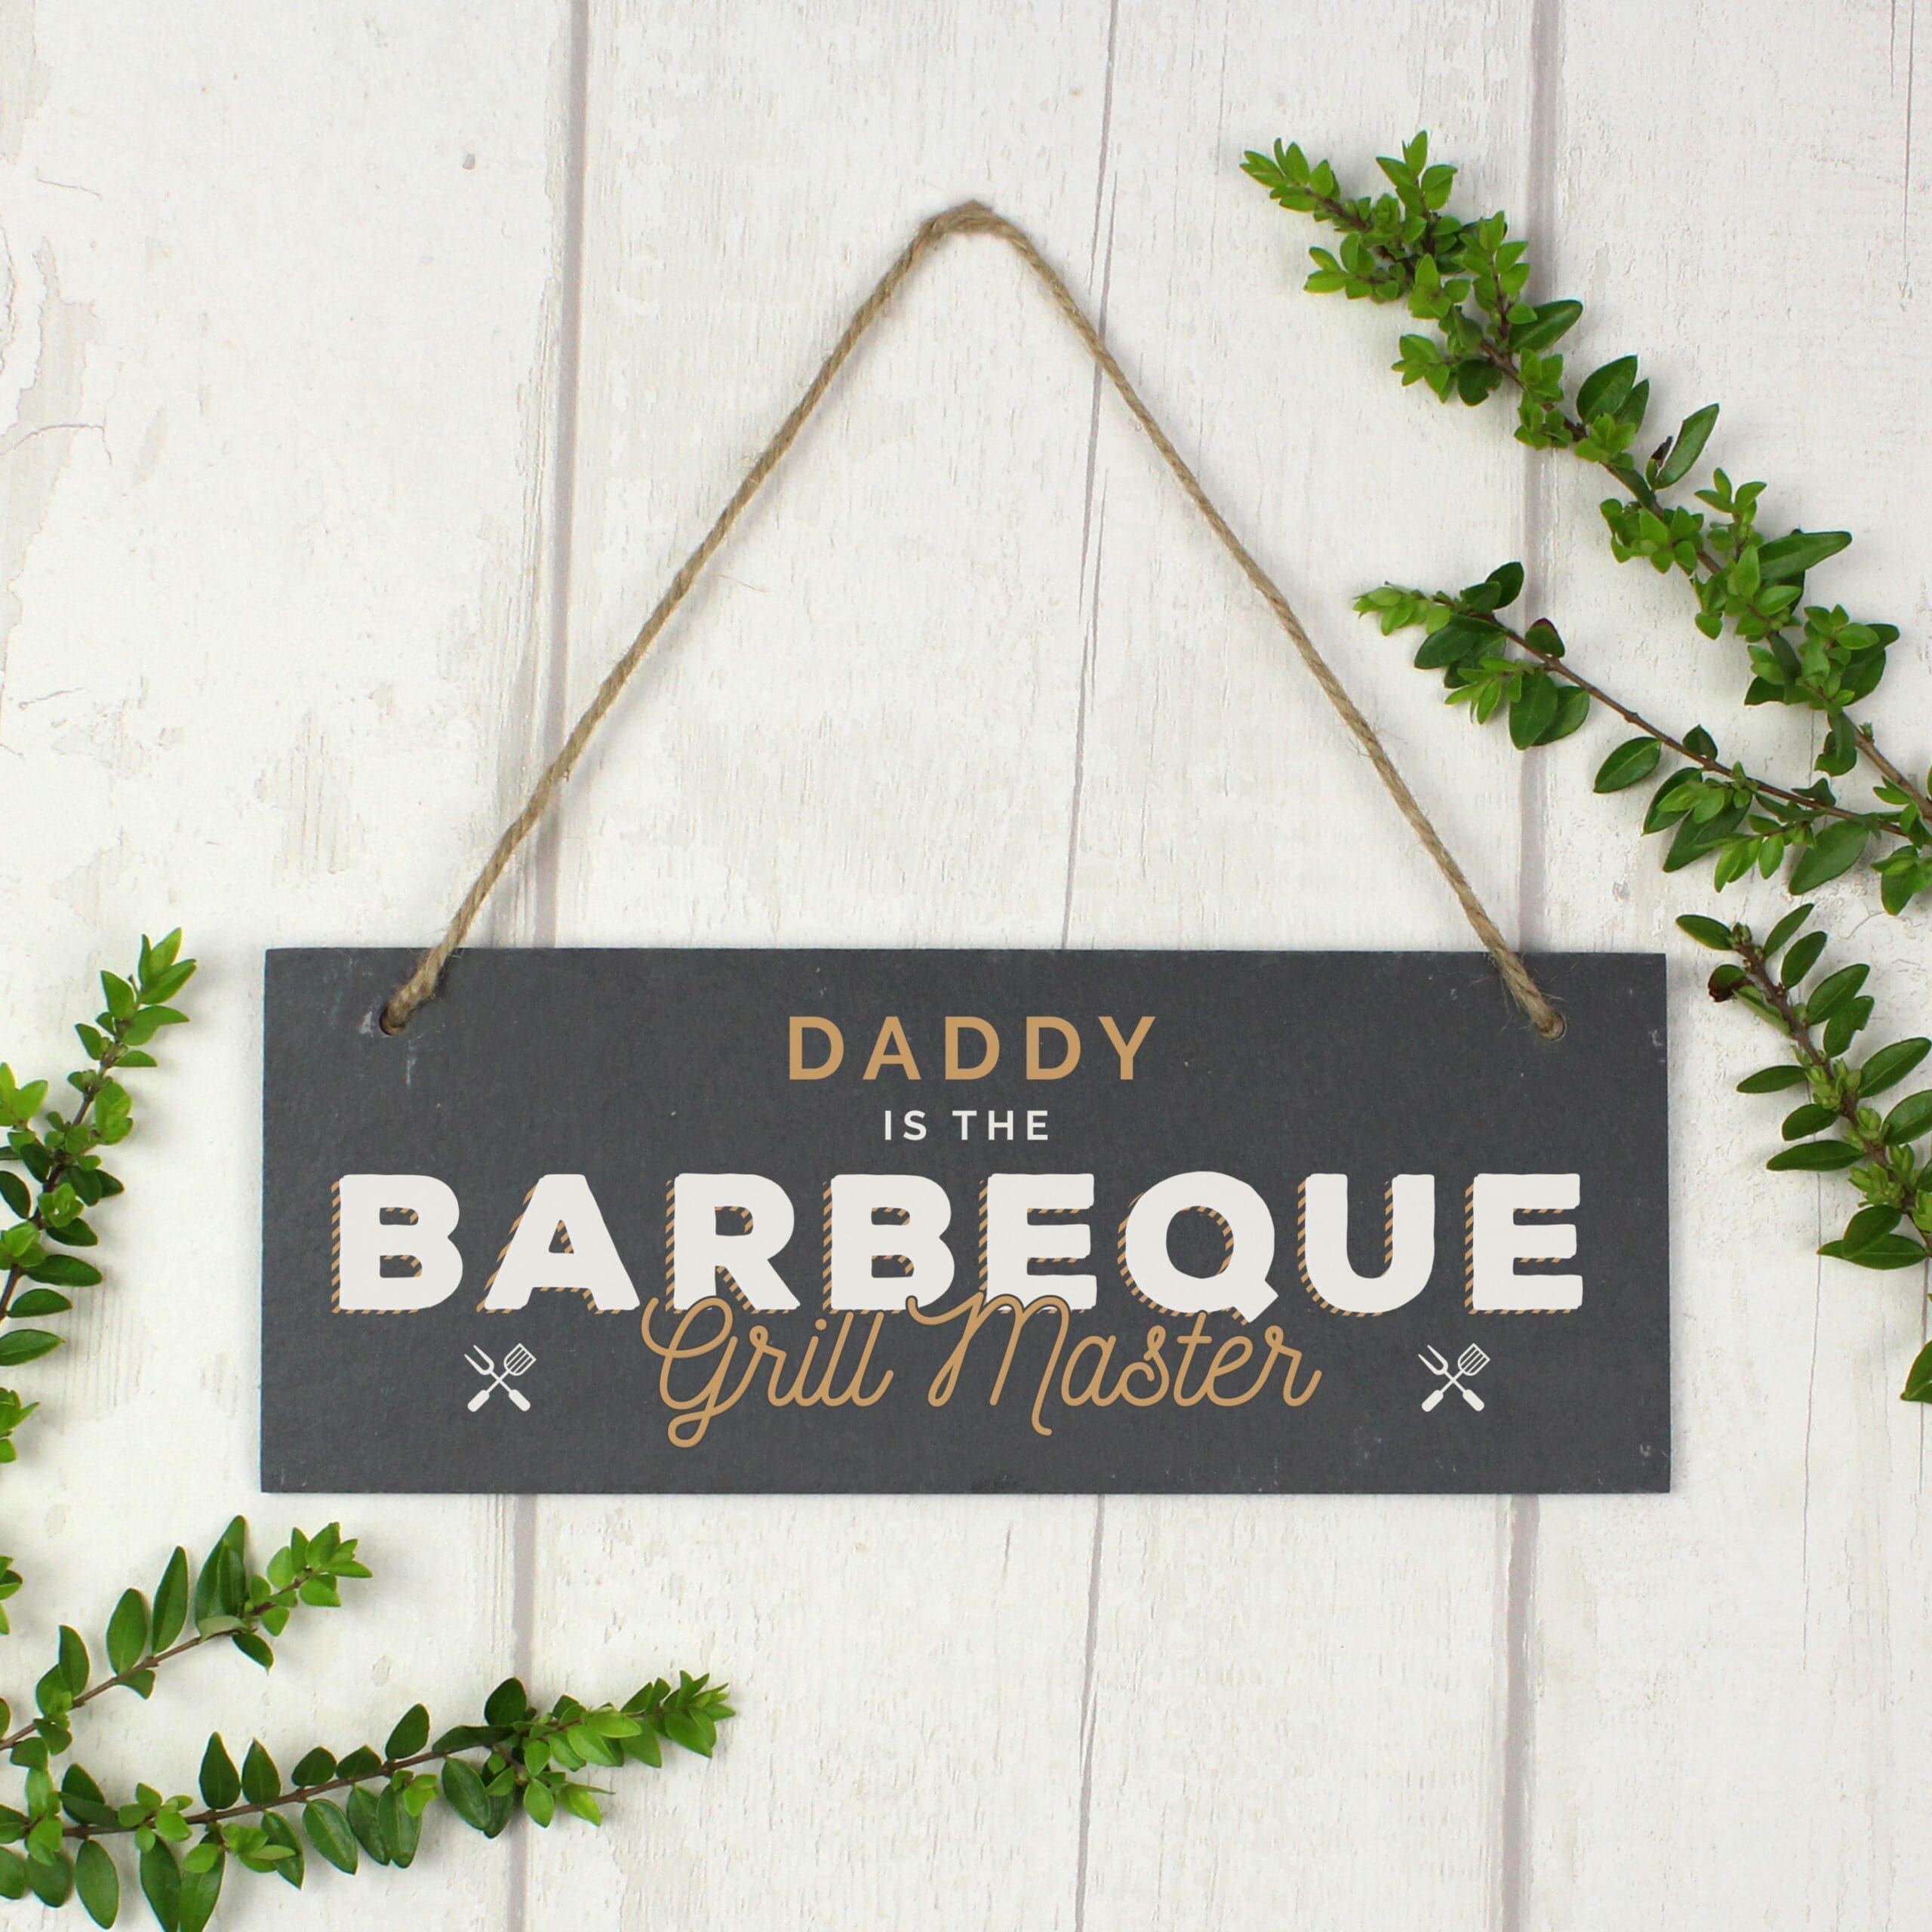 ""Barbeque Grill Master"" Printed Hanging Slate Plaque